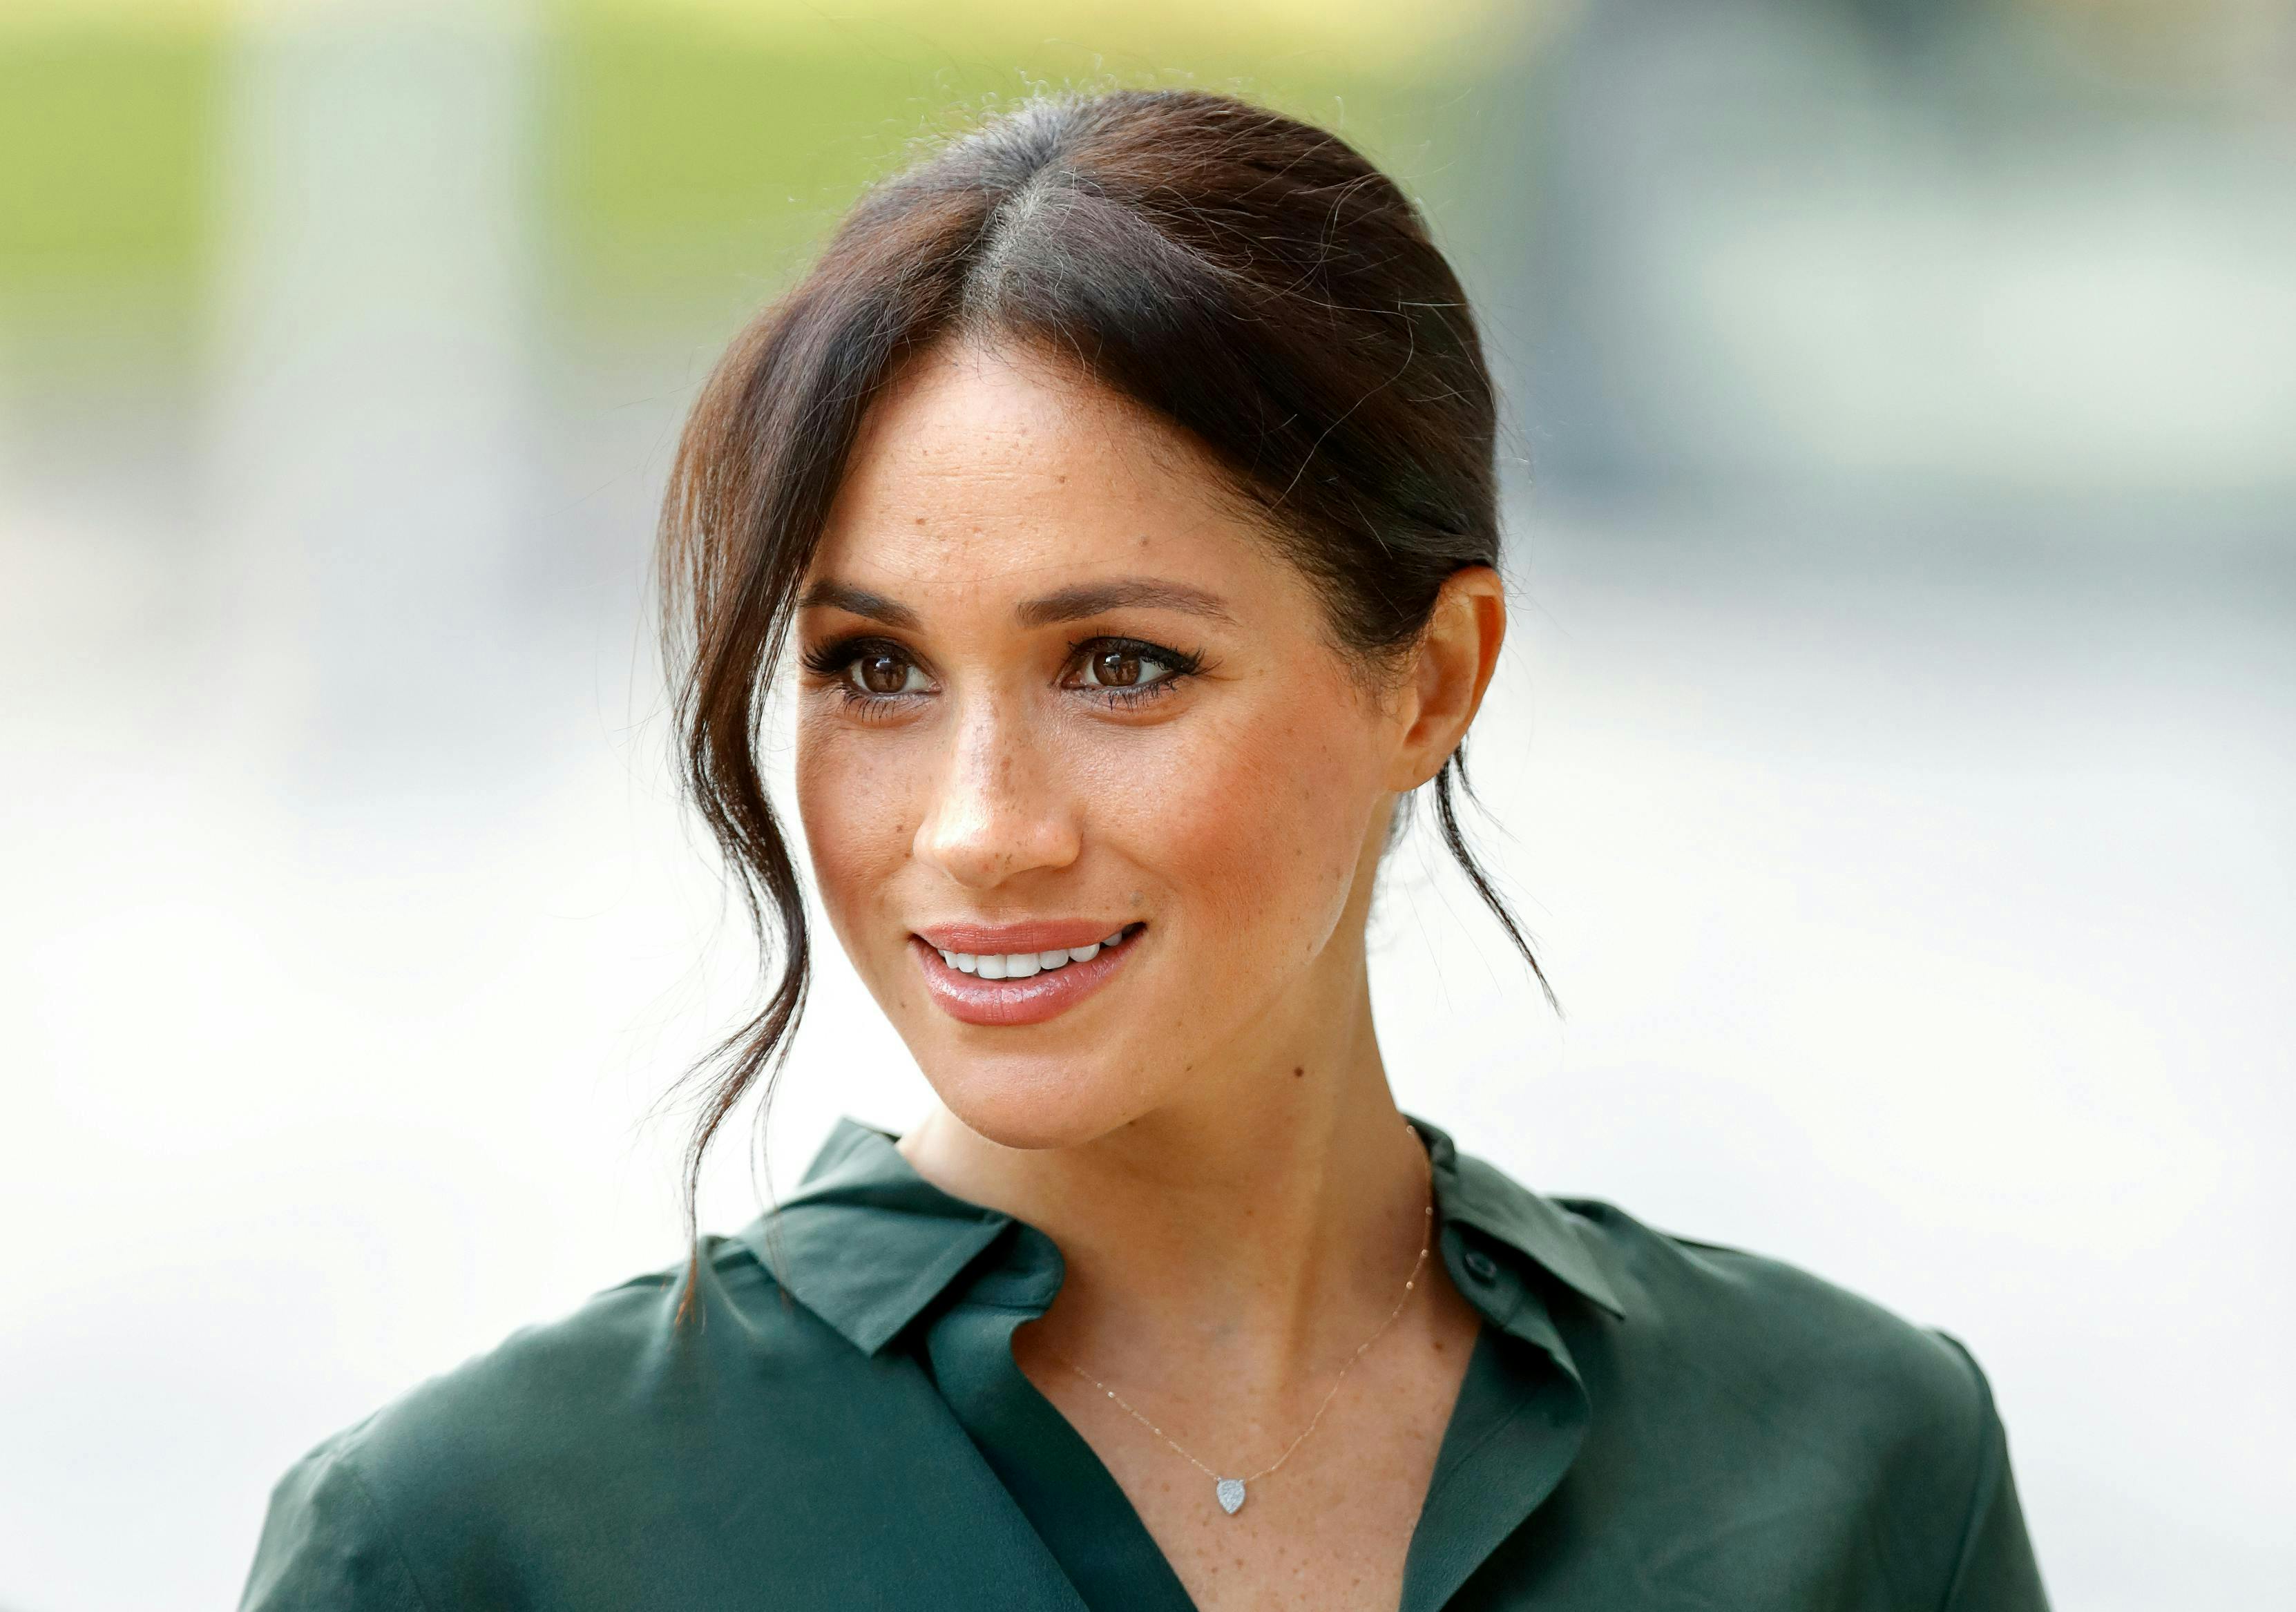 royal family,royals,meghan,meghan markle,hair up,& other stories bognor regis person human face clothing apparel